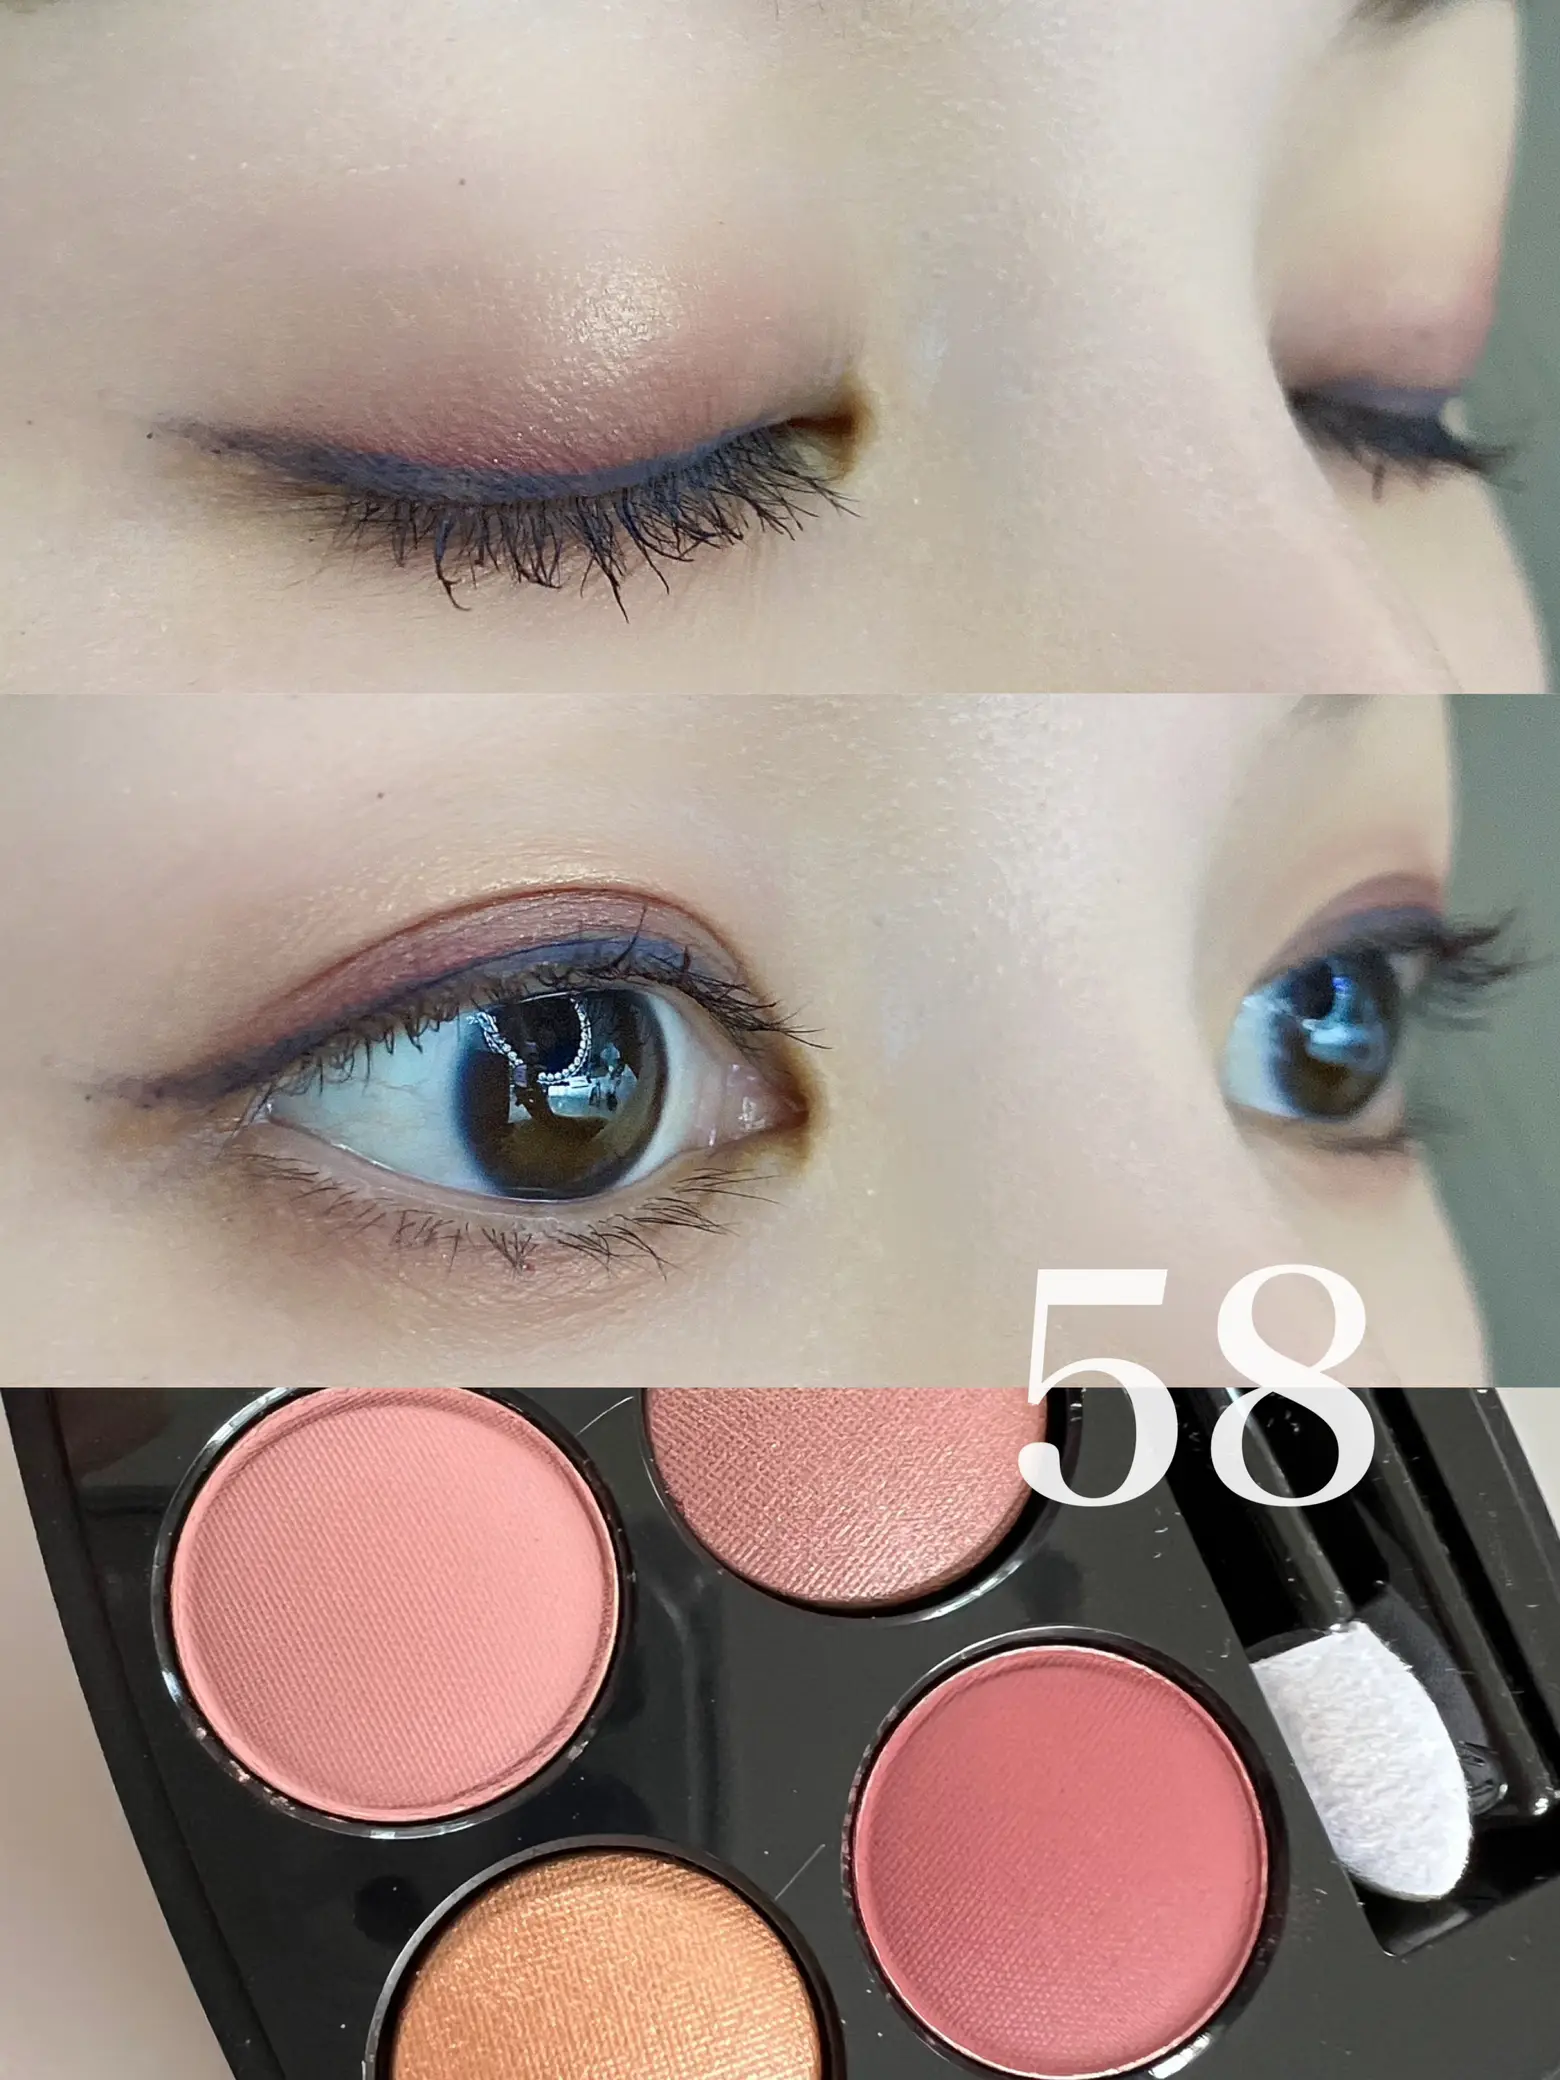 CHANEL 58 Mauve × Beauty of blue gray✨, Gallery posted by アン